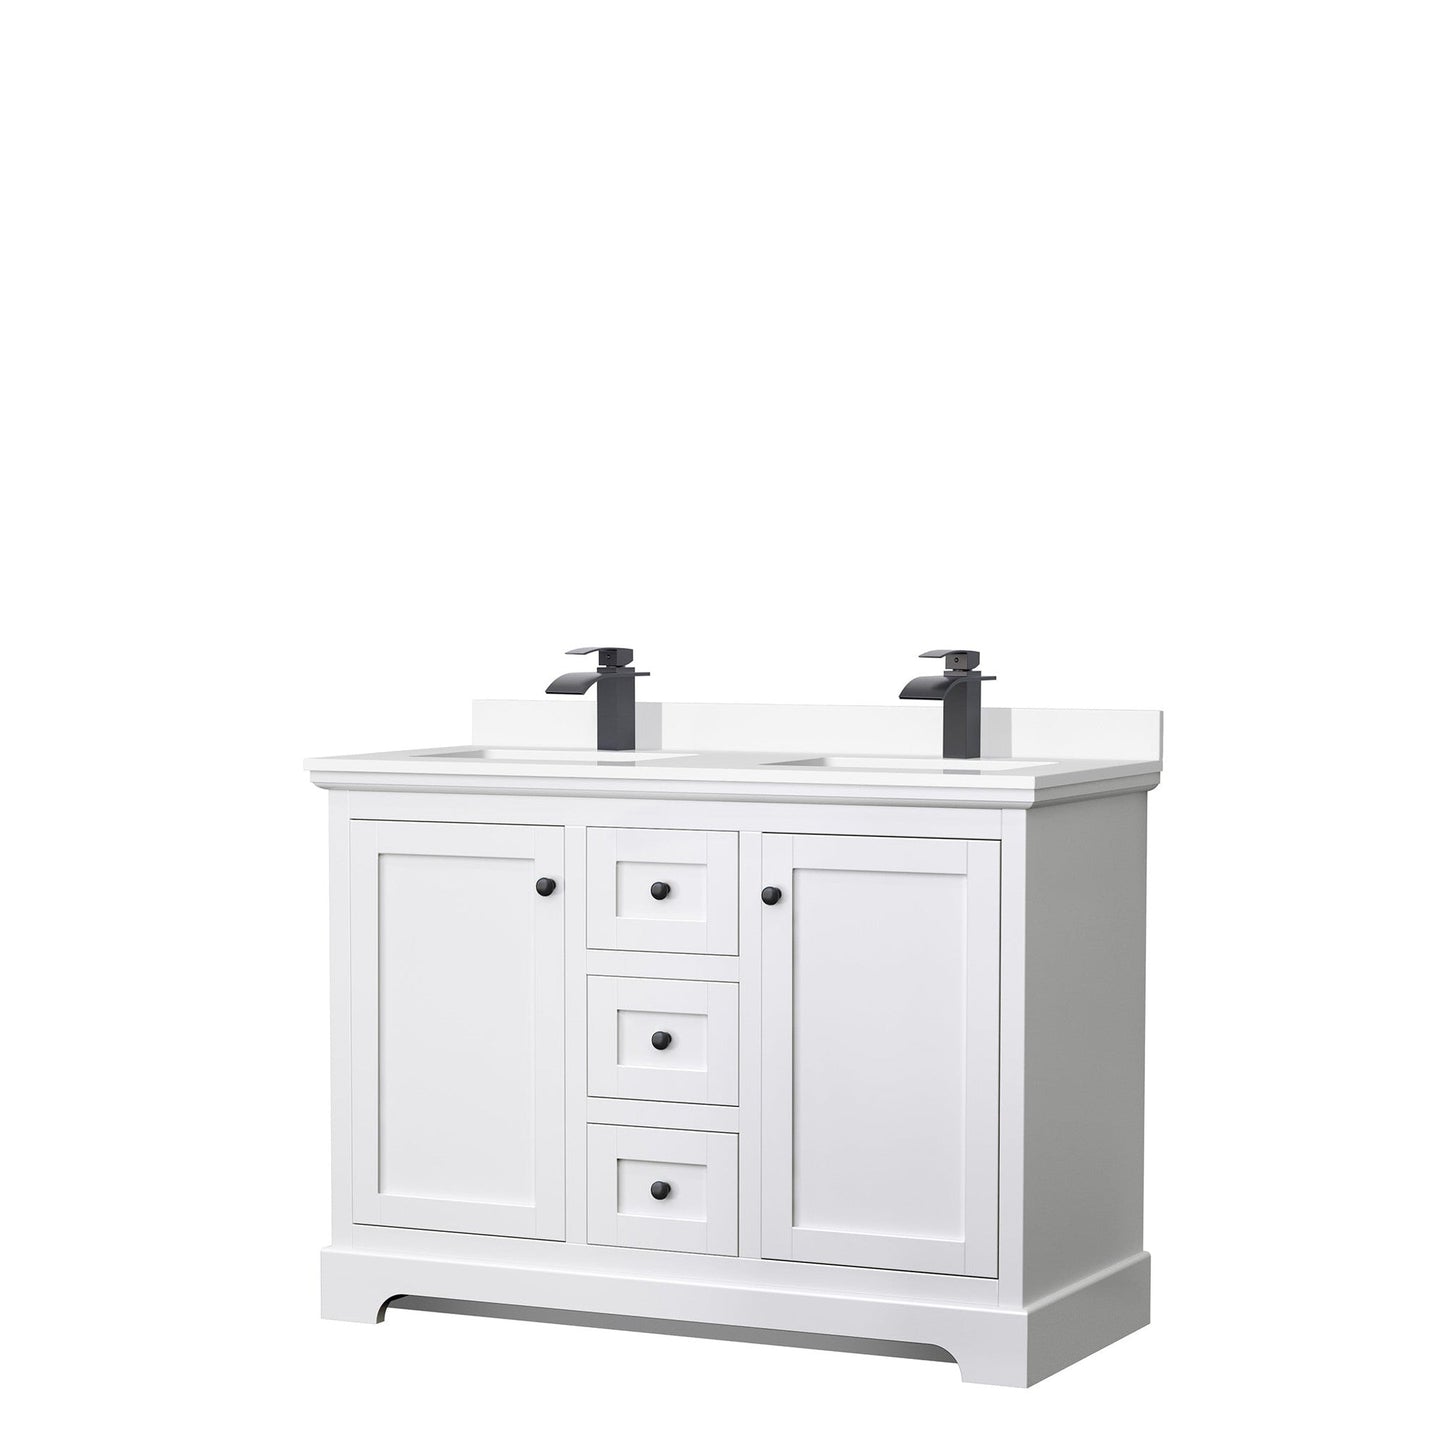 Avery 48" Double Bathroom Vanity in White, White Cultured Marble Countertop, Undermount Square Sinks, Matte Black Trim